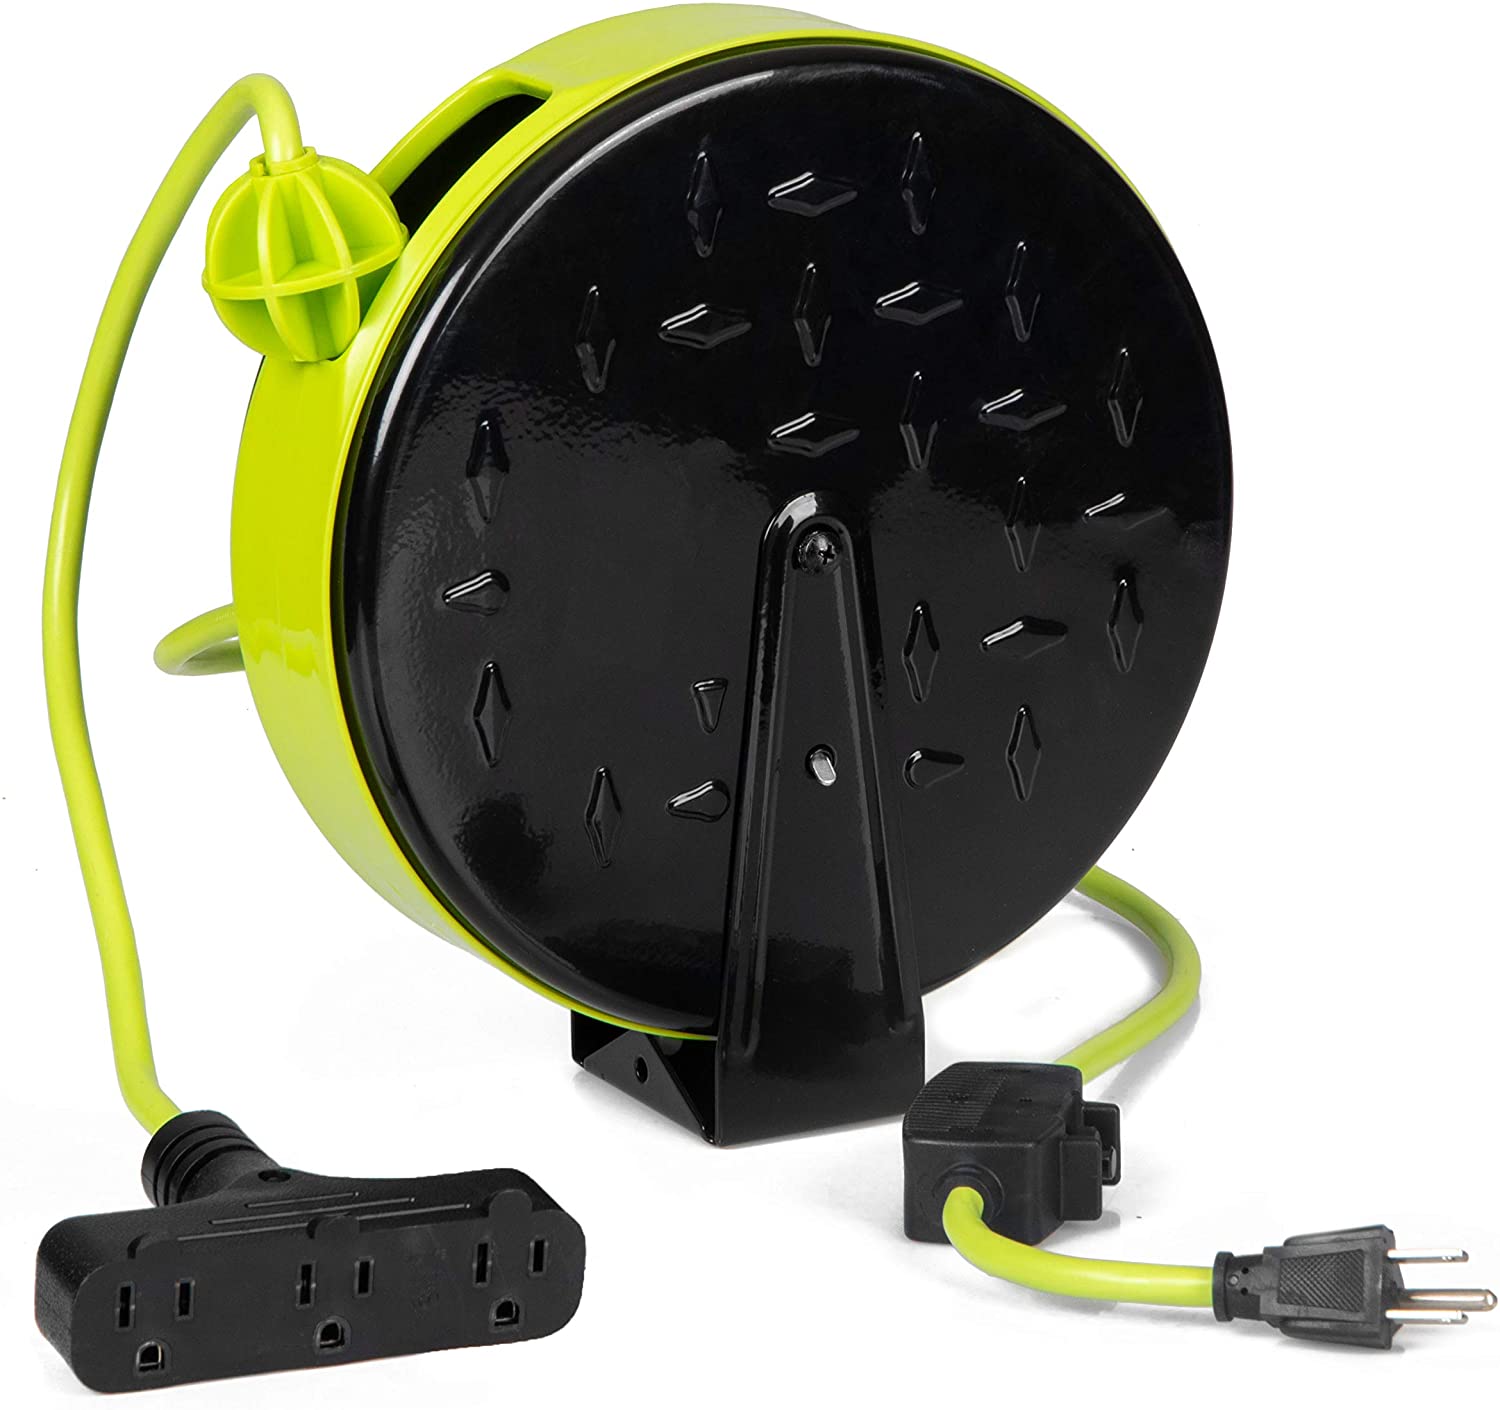 40 Ft Retractable Extension Cord Reel - 2 in 1 Mountable & Portable Power  Cord Reel with 3 Electrical Outlets - 12/3 SJTW Heavy Duty Yellow Cable, 15